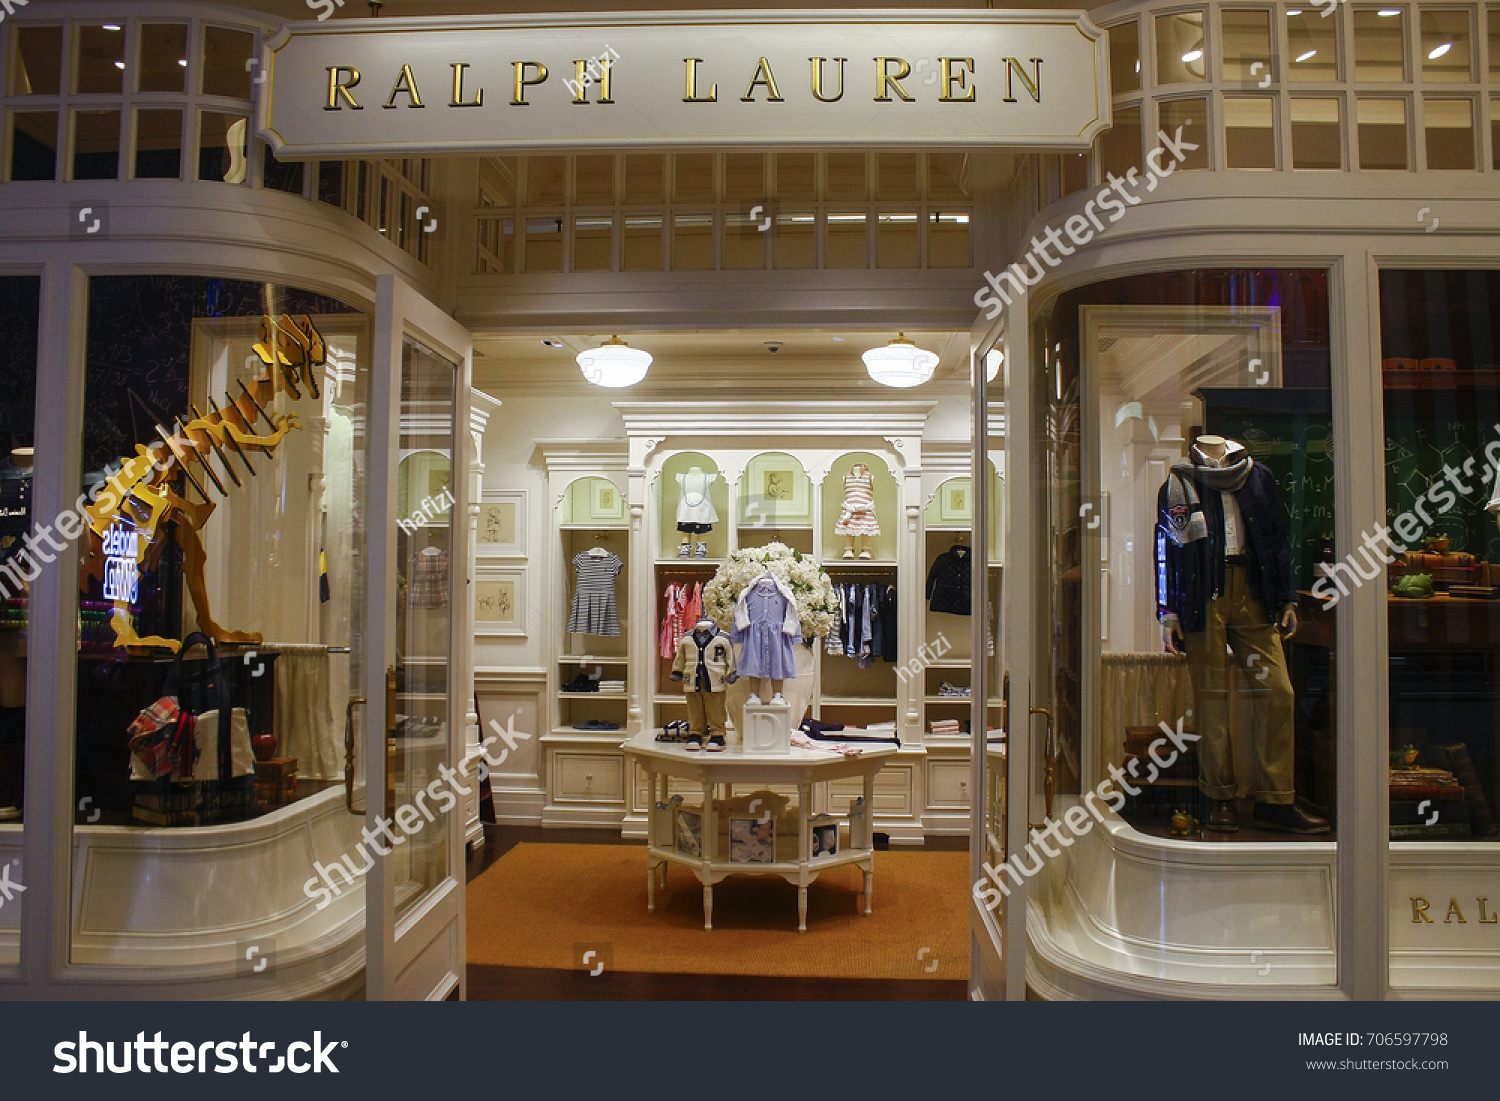 Polo Ralph Lauren Outlets Near Me - Prism Contractors & Engineers